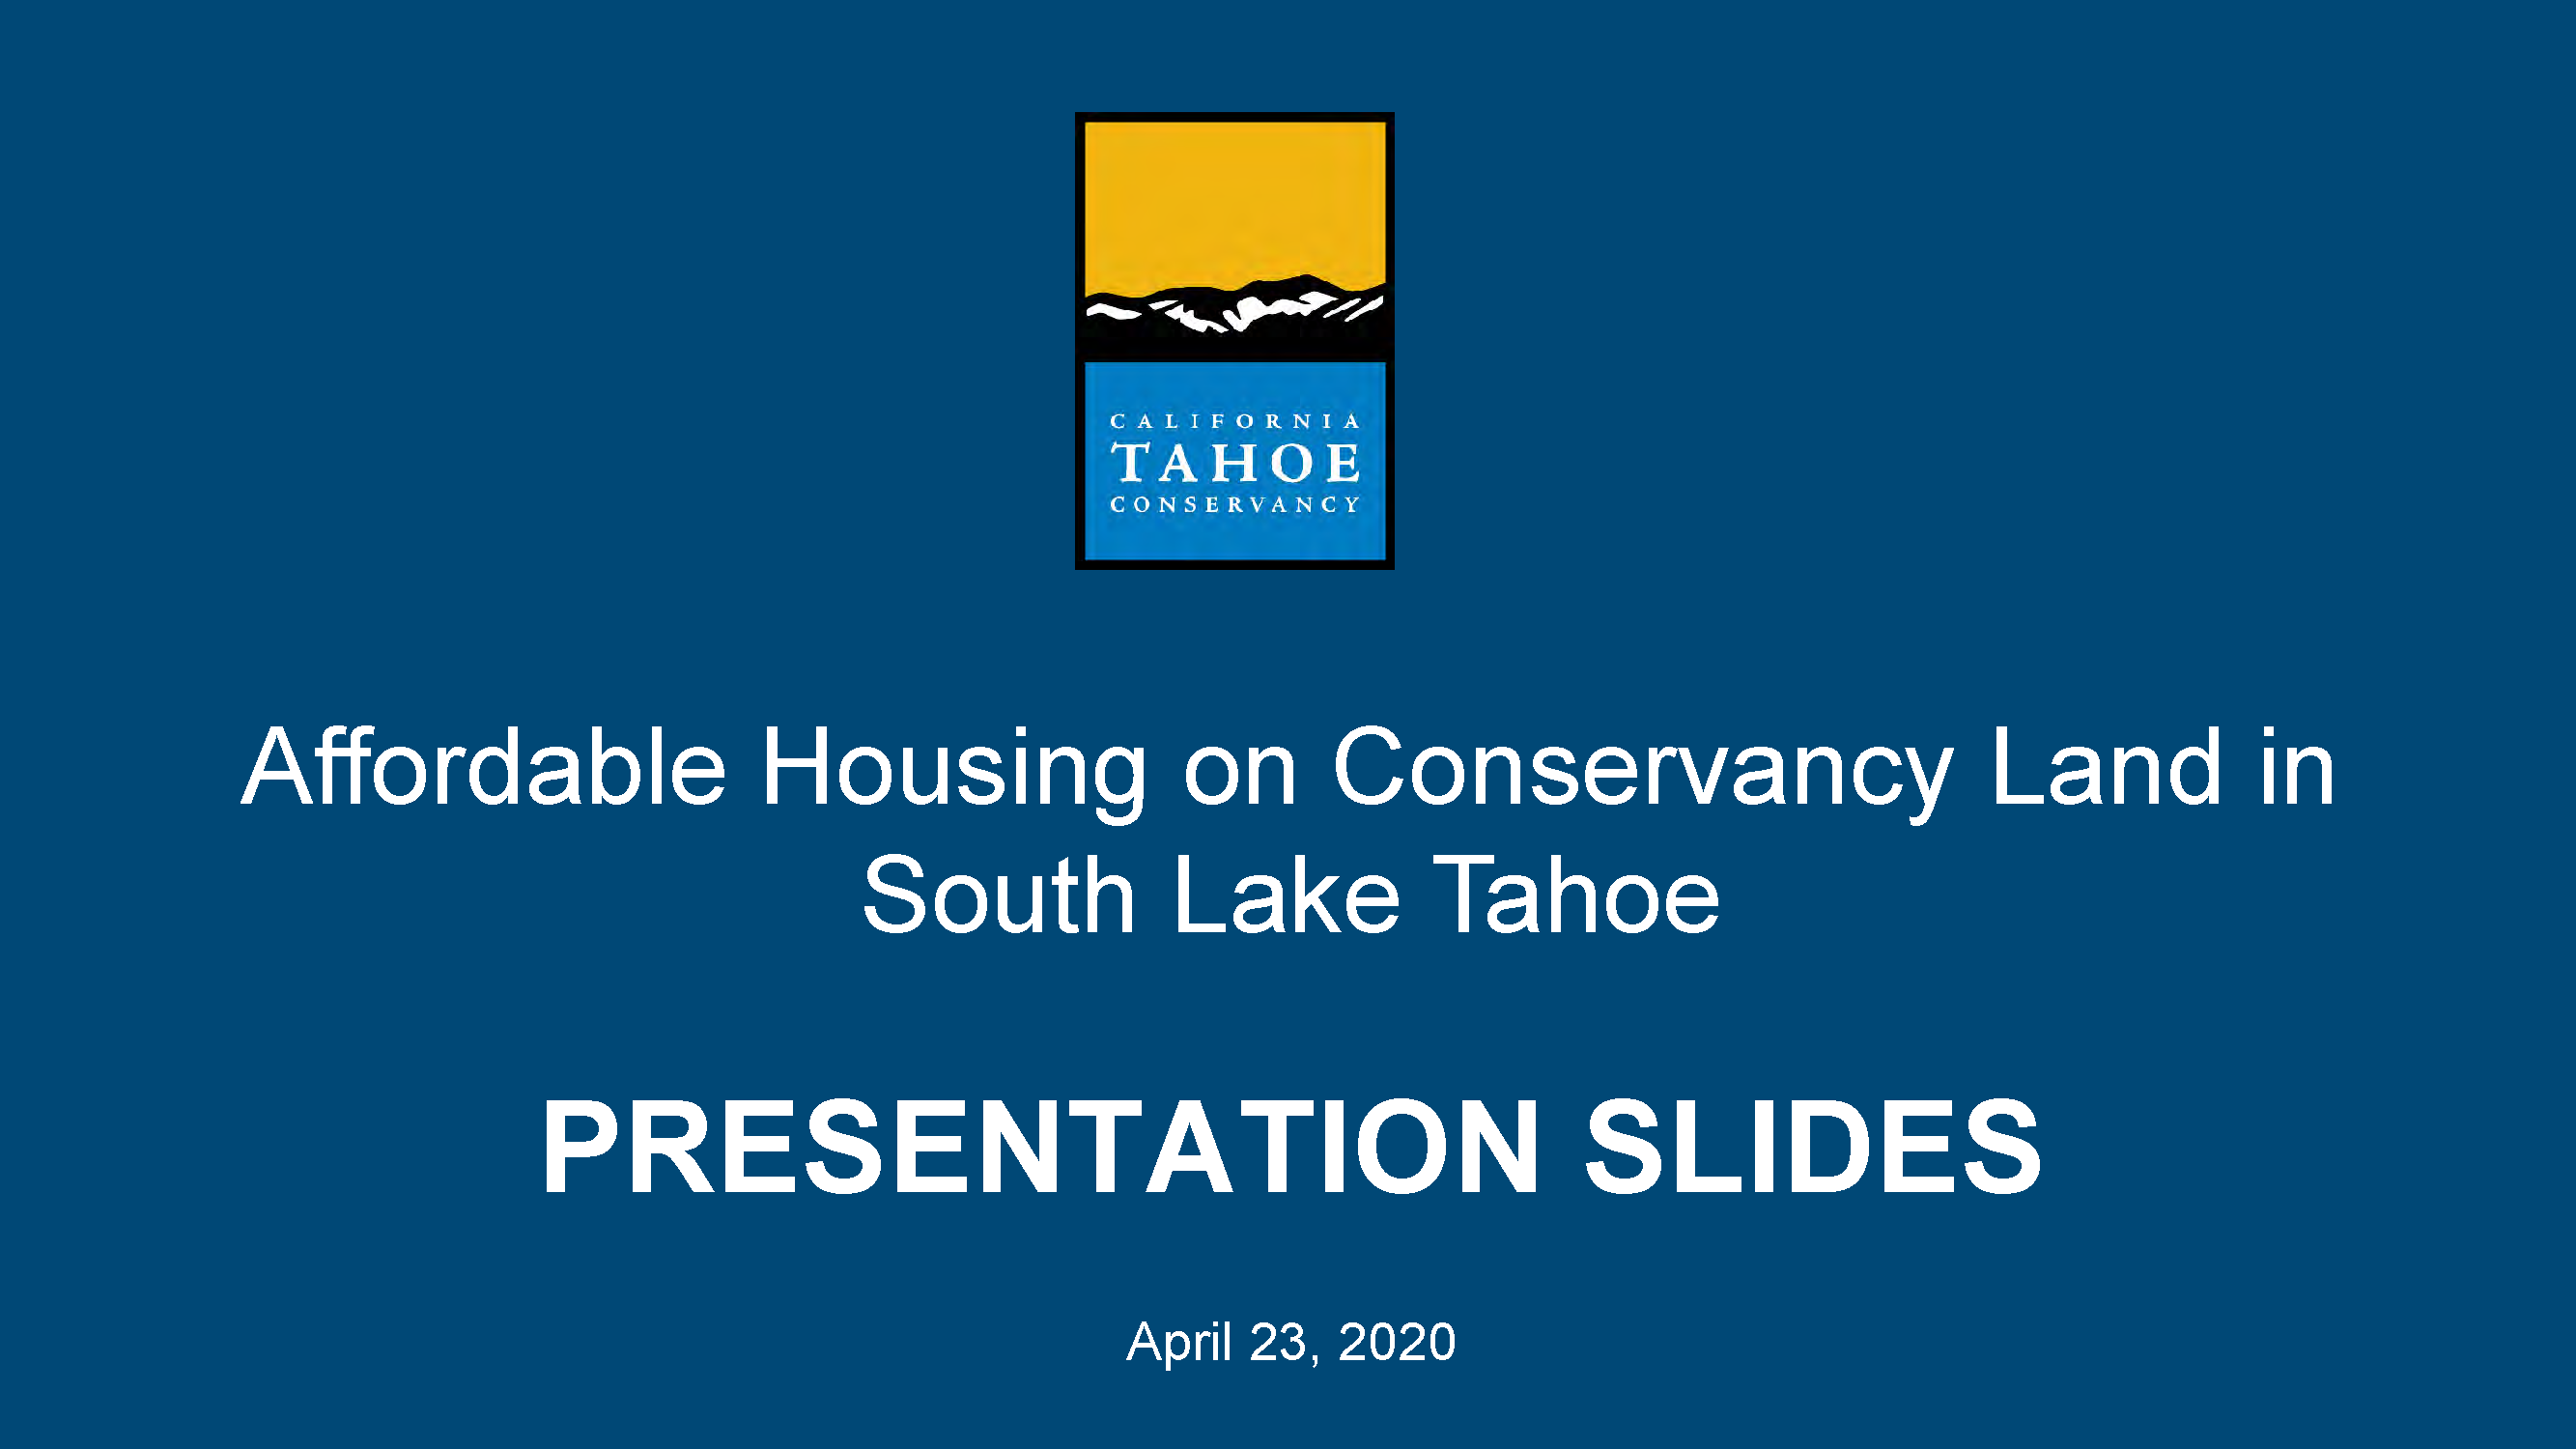 PowerPoint slides for the April 23 virtual public meeting on affordable housing